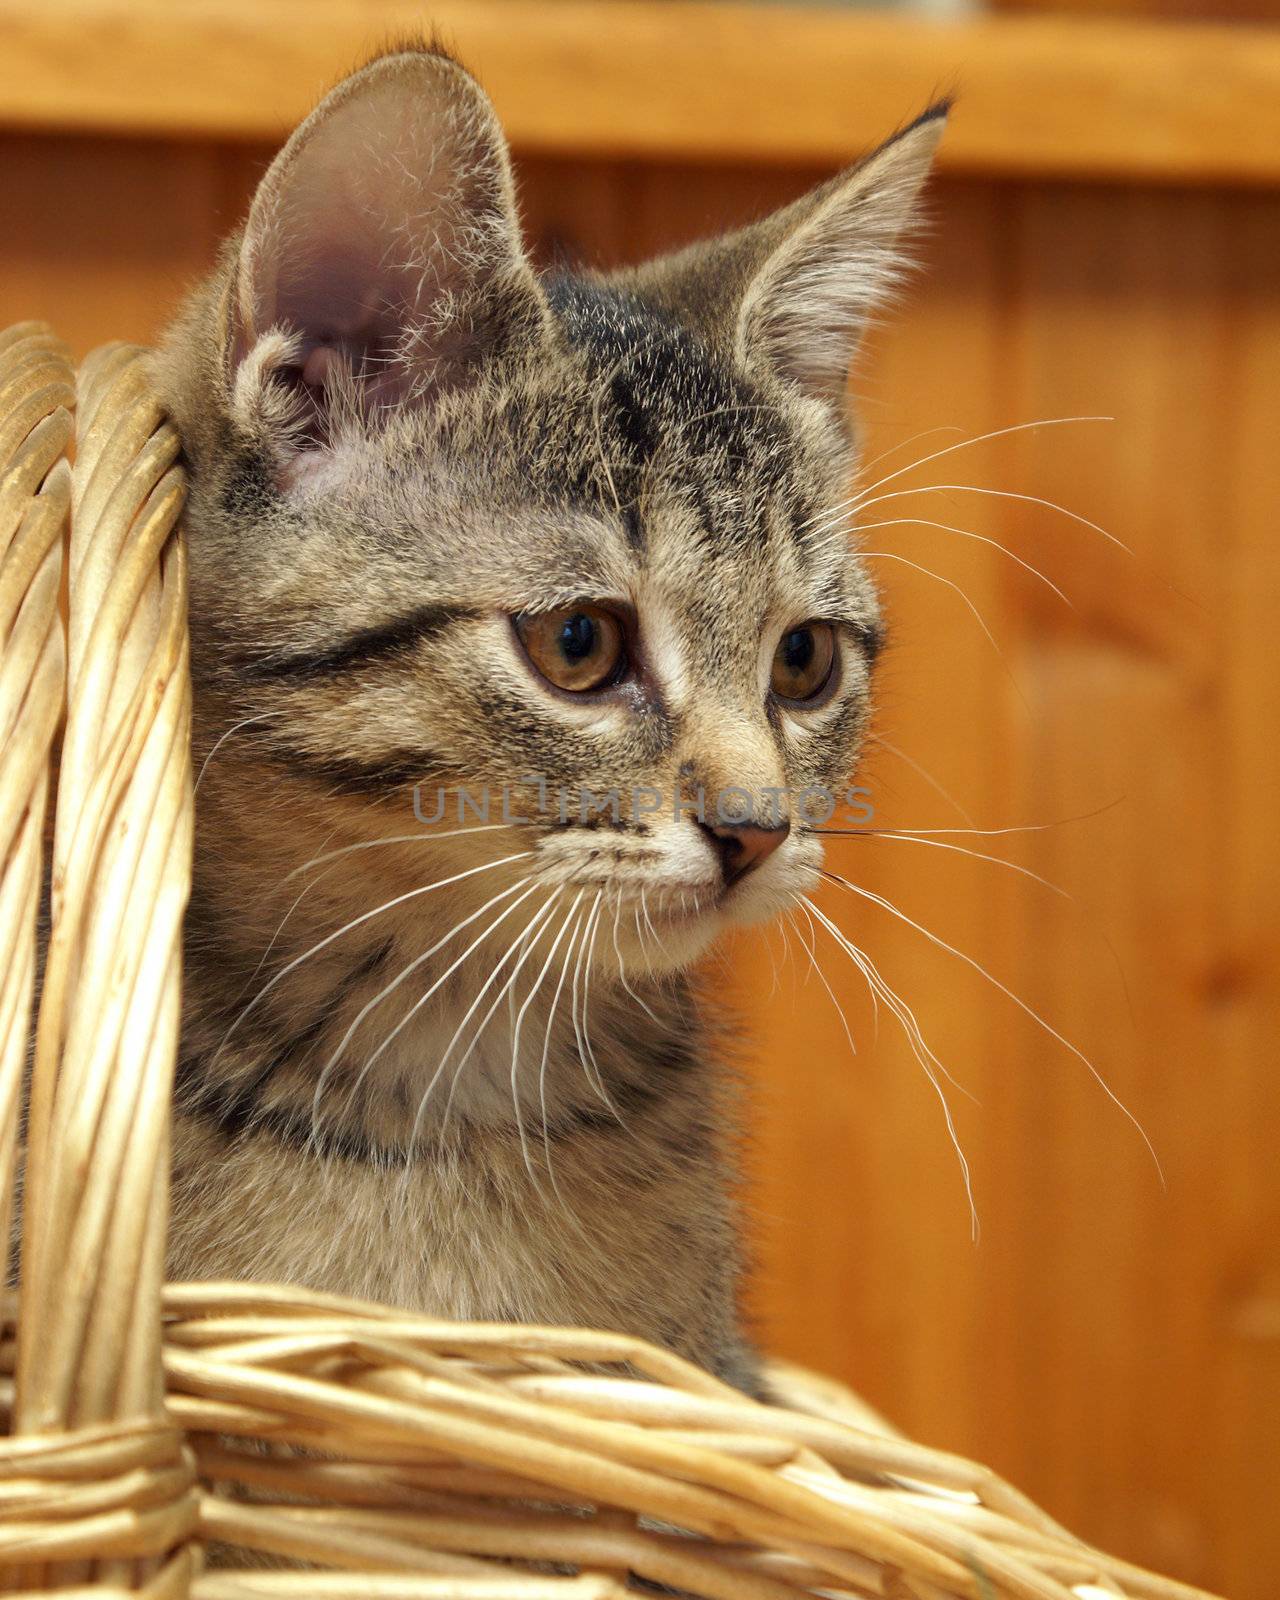 An adorable young kitten is inside a wicker basket after coming to her new home.